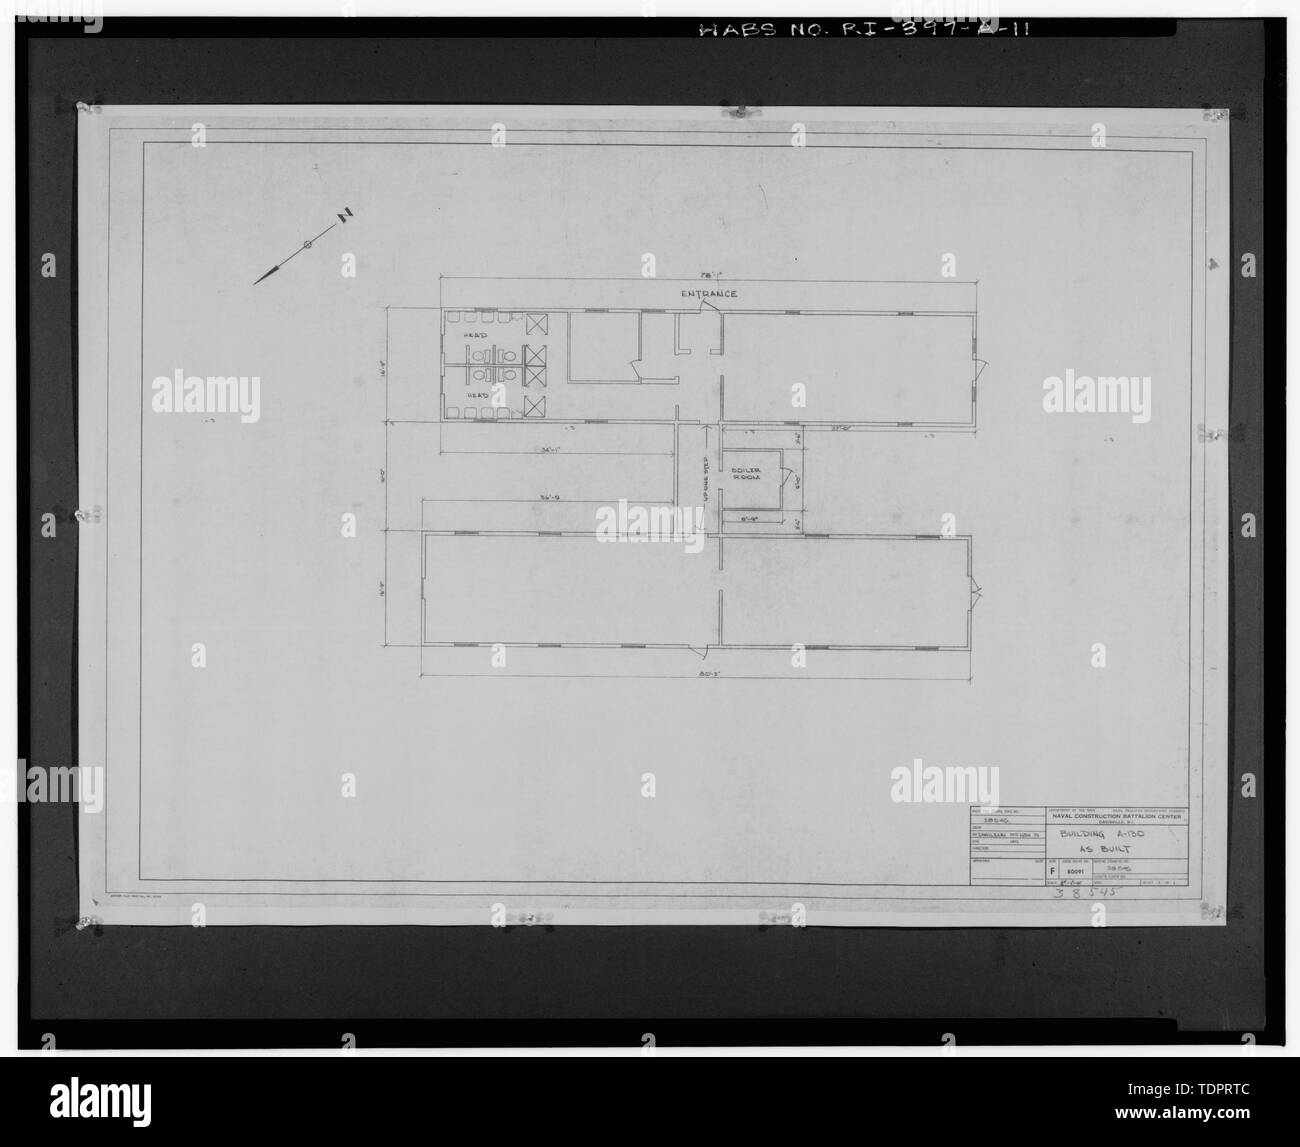 Photographic copy of the Naval Engineering drawing (original is located at Naval Construction Battalion Center, Davisville, RI) Floor plan of building A-130, drawing number 38545, dated Nov. 1970 (Building A-130 is to east, building A-129 is to west) - Advance Base Depot, Davisville, Building A-130, Northeast section of Advance Base Depot, adjacent to Pier No. 1, Davisville, Washington County, RI Stock Photo